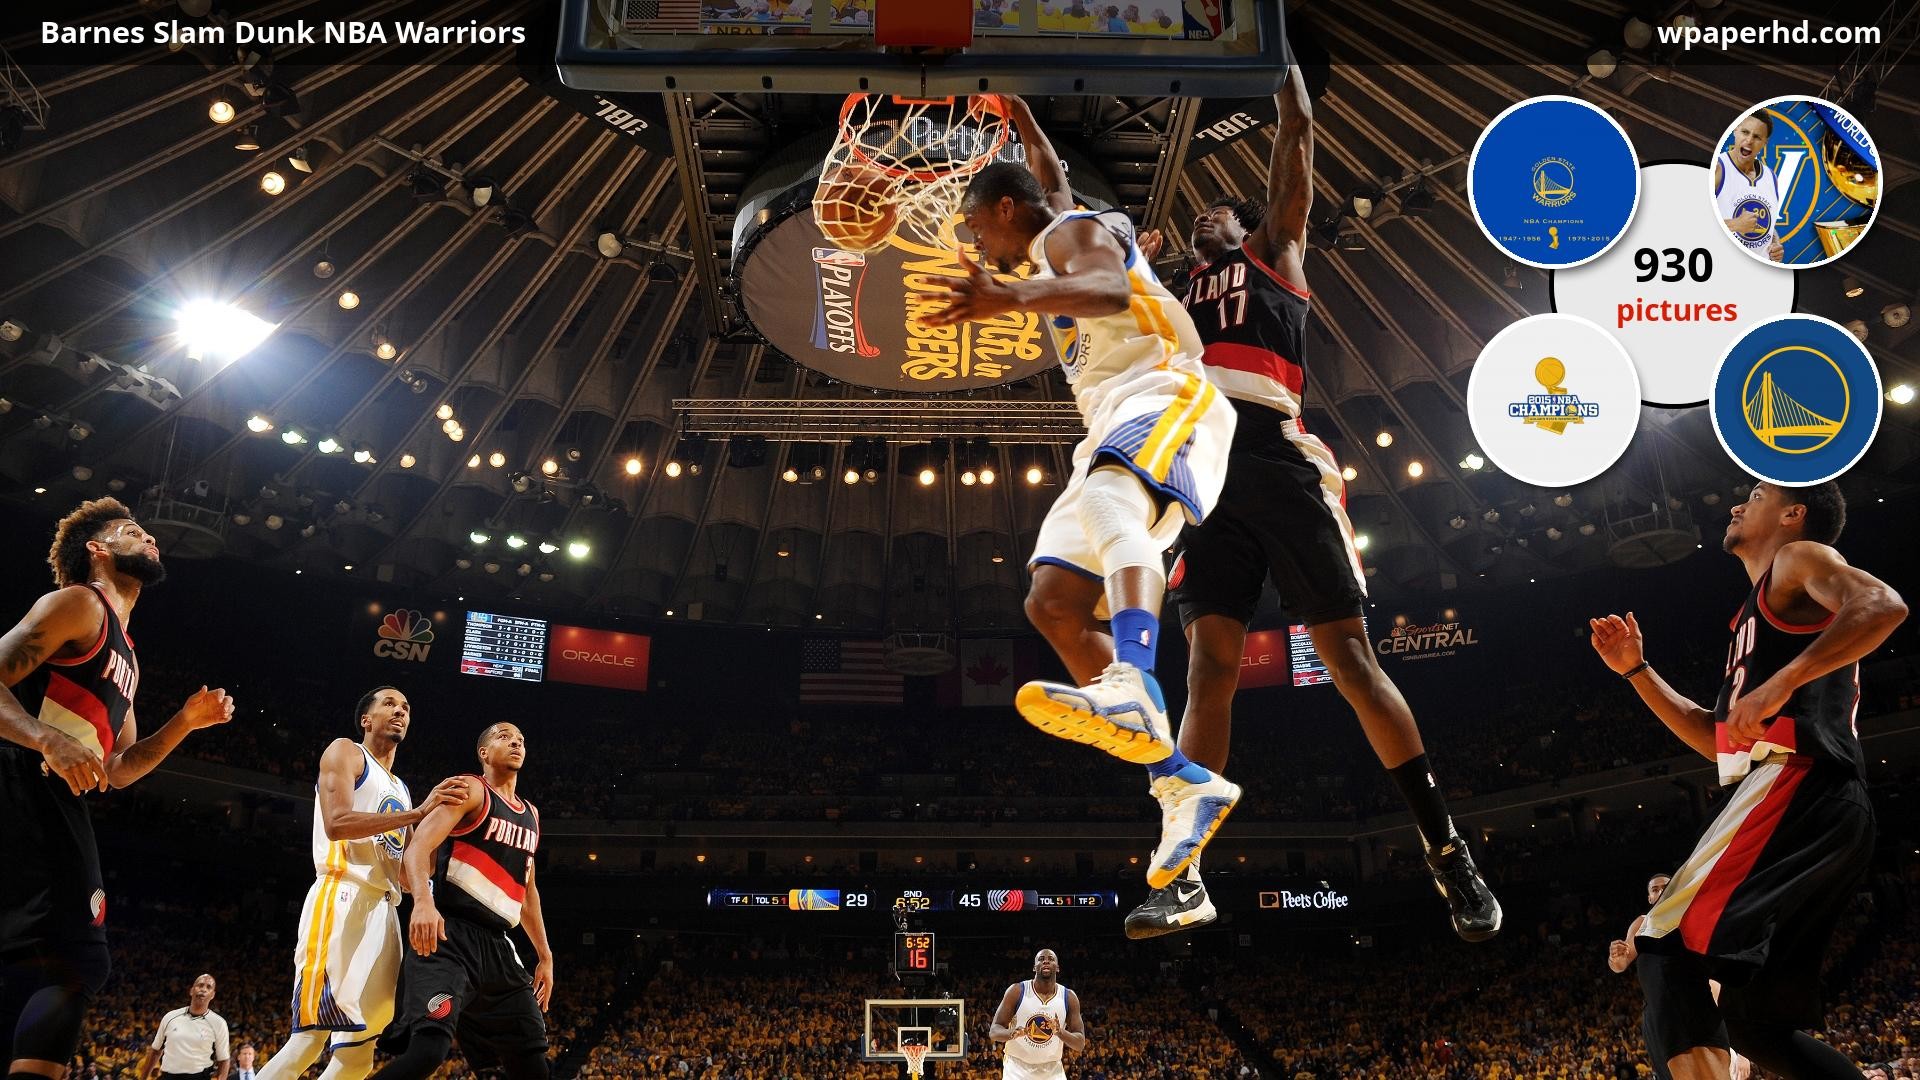 1920x1080 ... Dunk NBA Warriors wallpaper, where you can download this picture in  Original size and ...